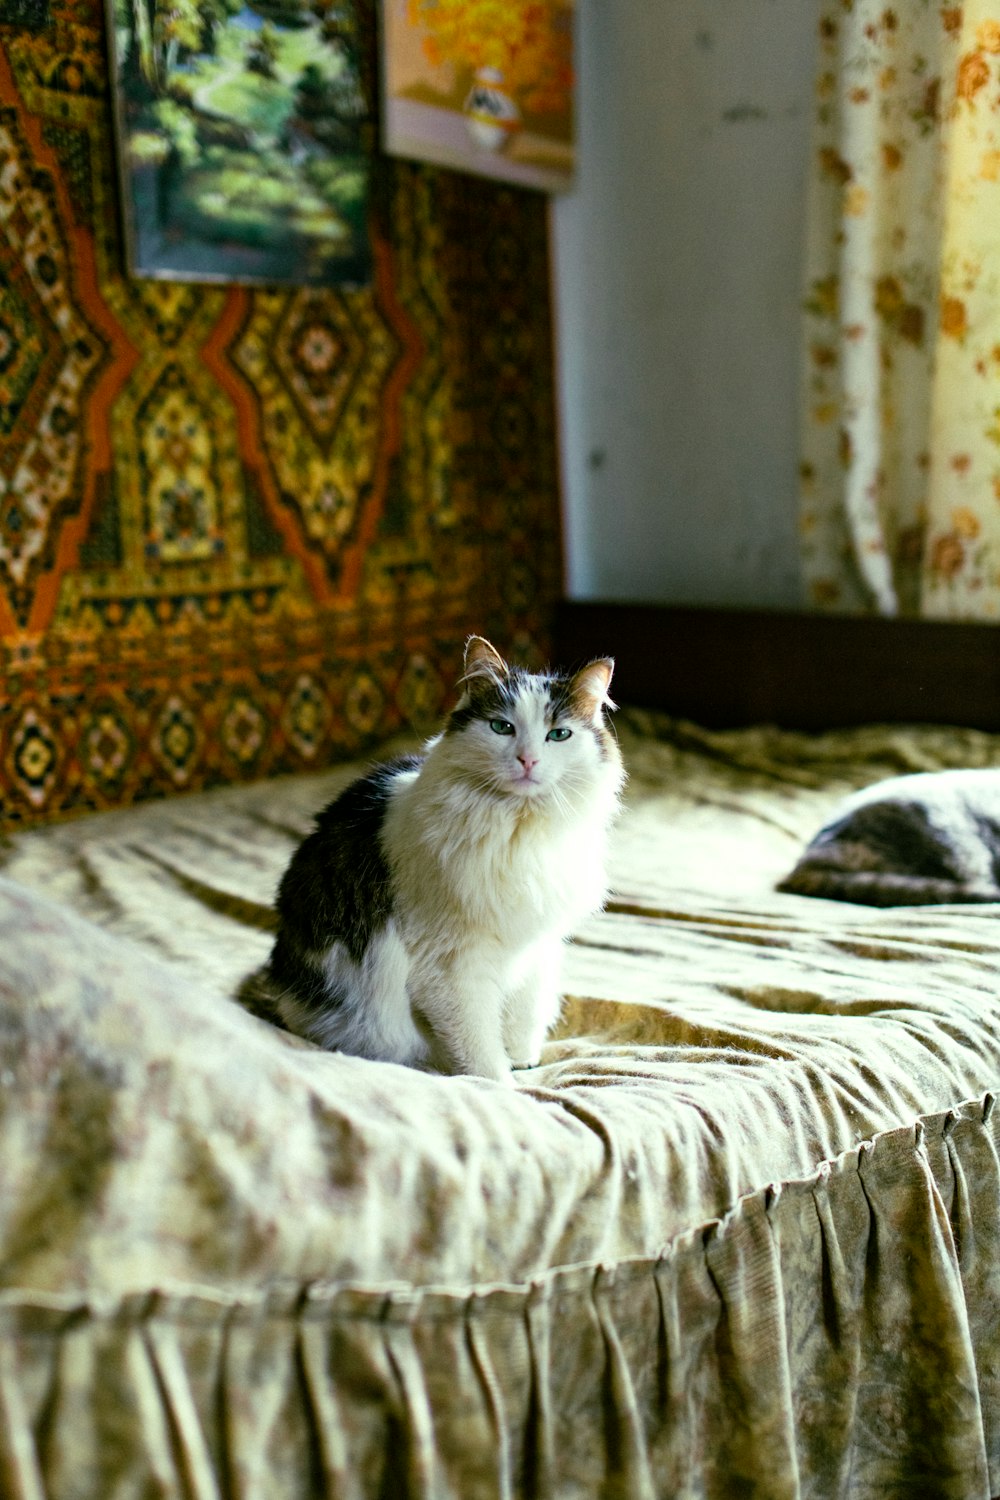 two cats sitting on a bed in a room